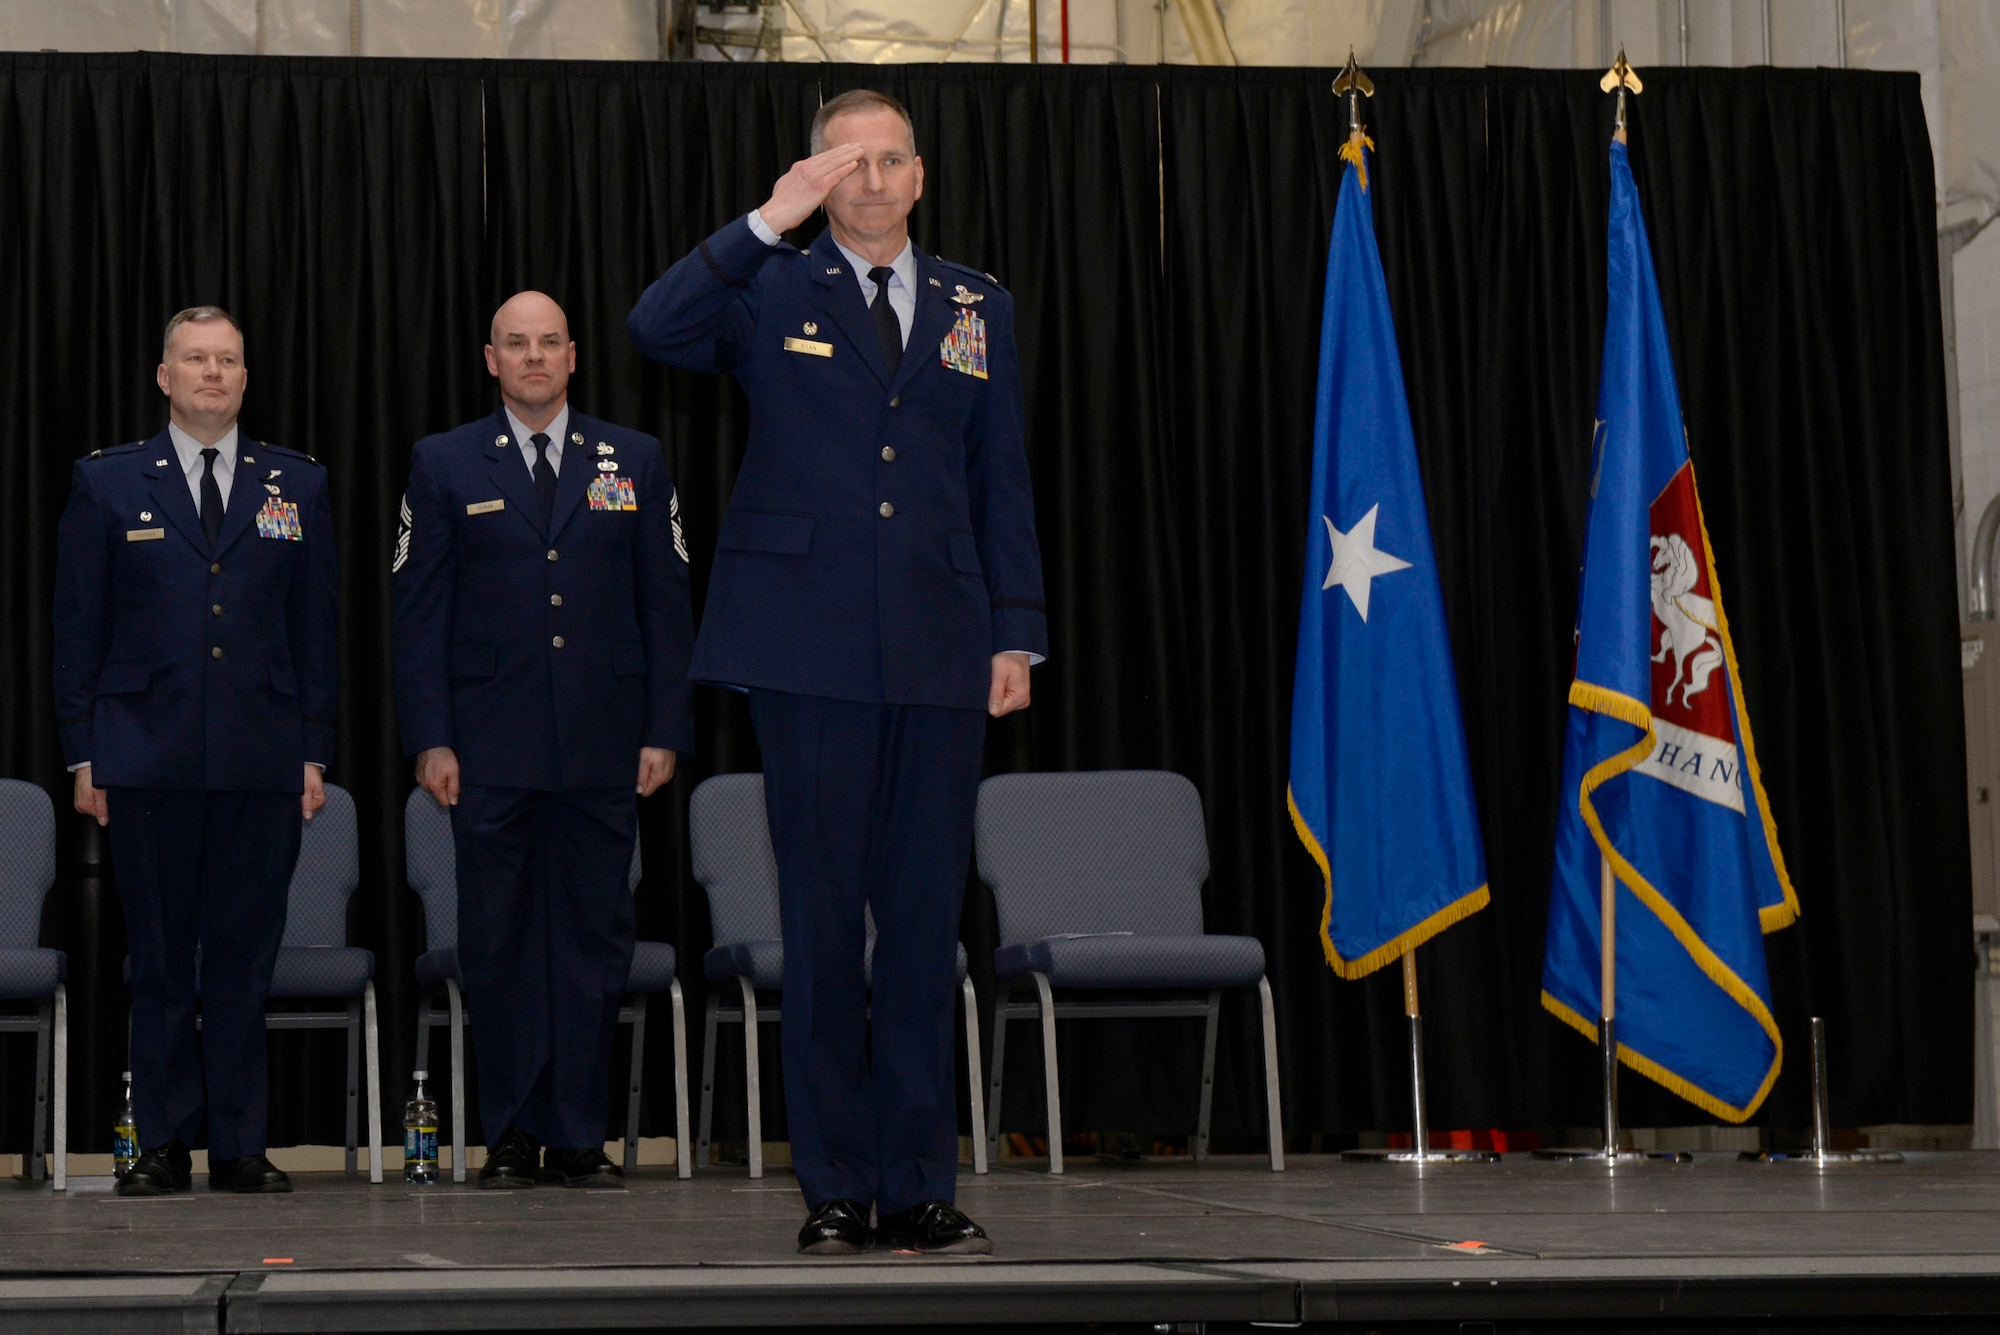 Col. James P. Ryan, commander 157th Air Refueling Wing, renders a final salute to the Airmen of the 157th during a change of command ceremony at Pease Air National Guard Base, N.H., March 10, 2018. Col. John W. Pogorek assumed command of the 157th ARW during this ceremony.(N.H. Air National Guard photo by Senior Airman Taylor Queen)